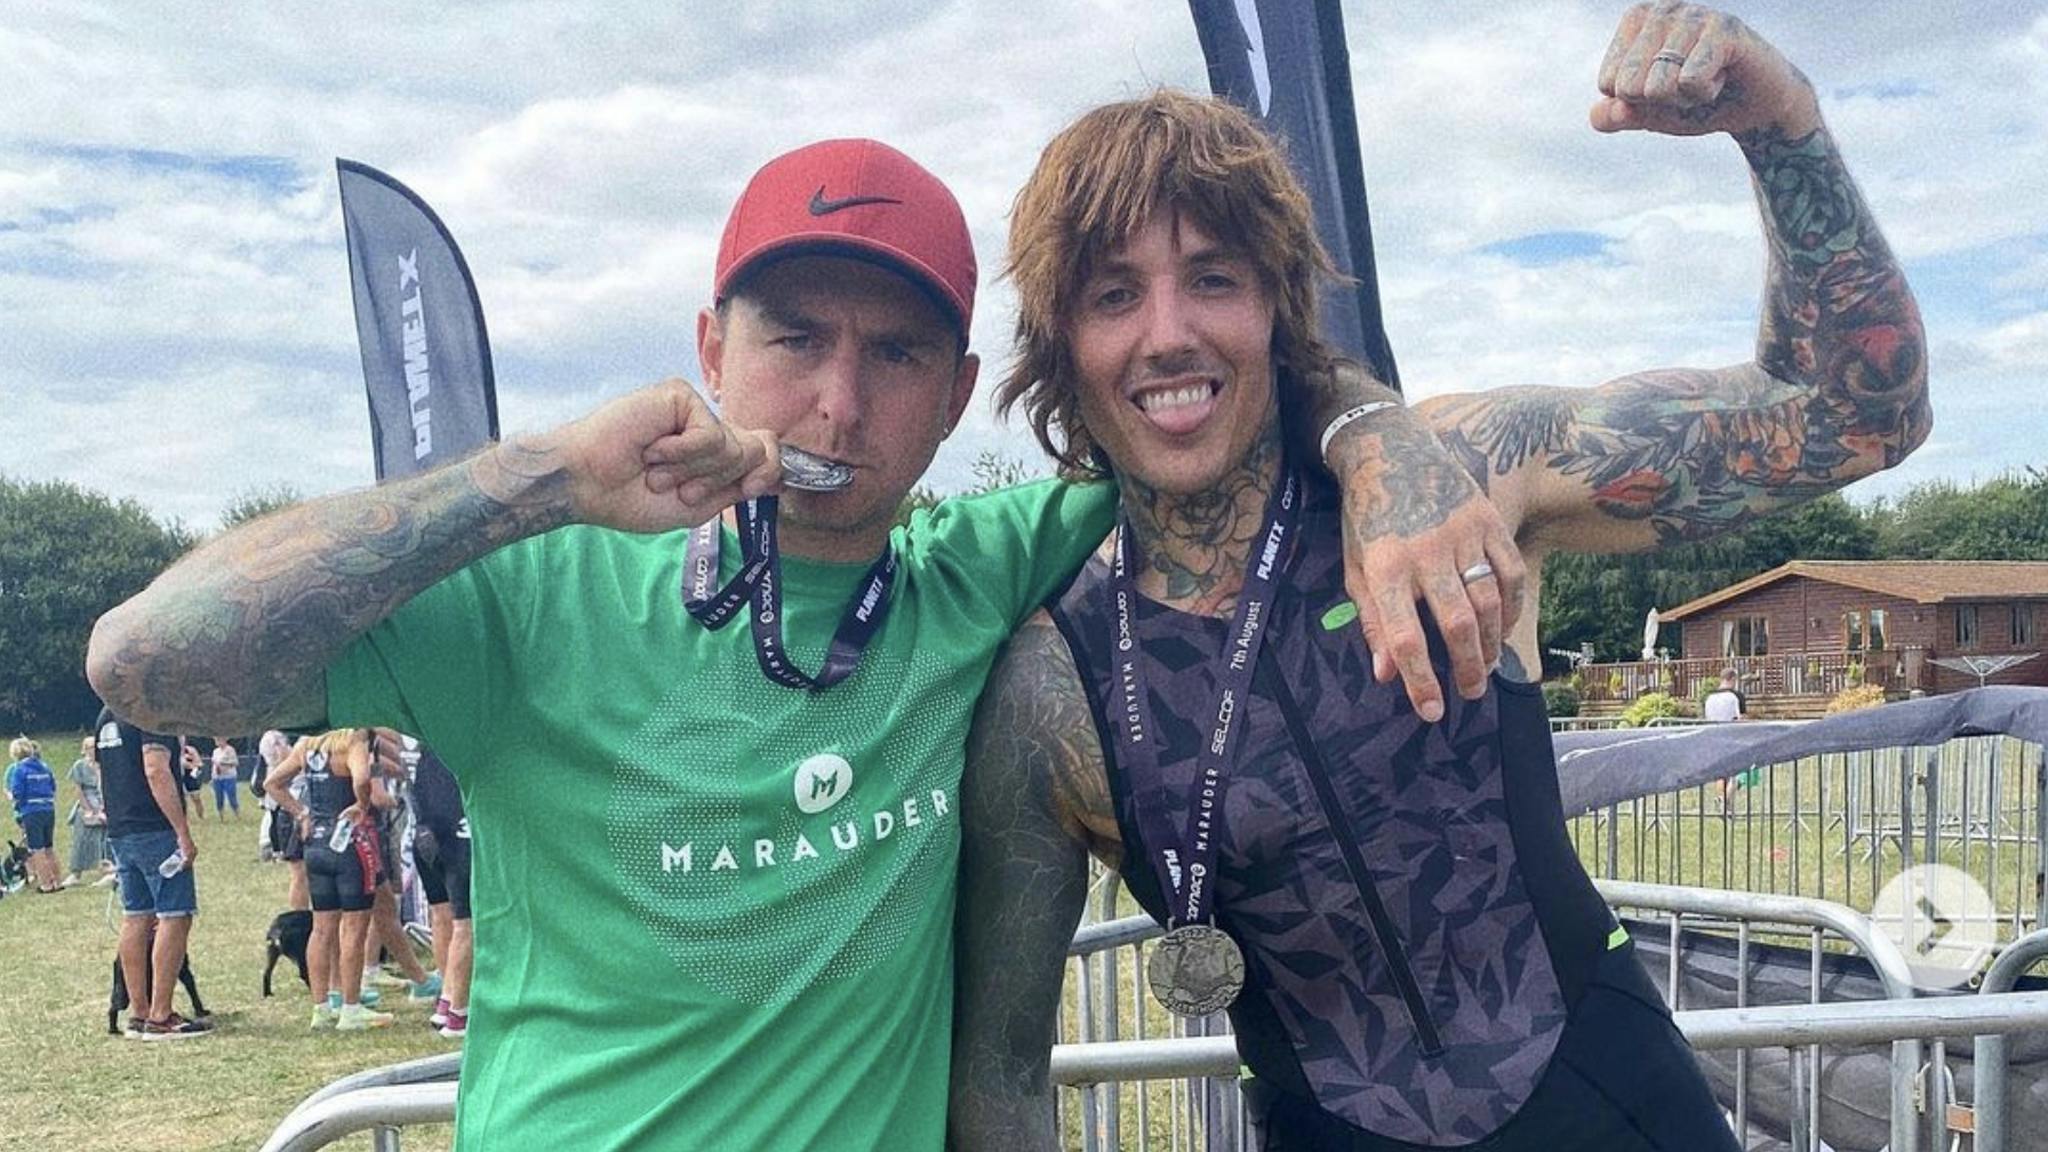 BMTH’s Oli Sykes and Mat Nichols complete charity triathlon for UKRAINEPRIDE